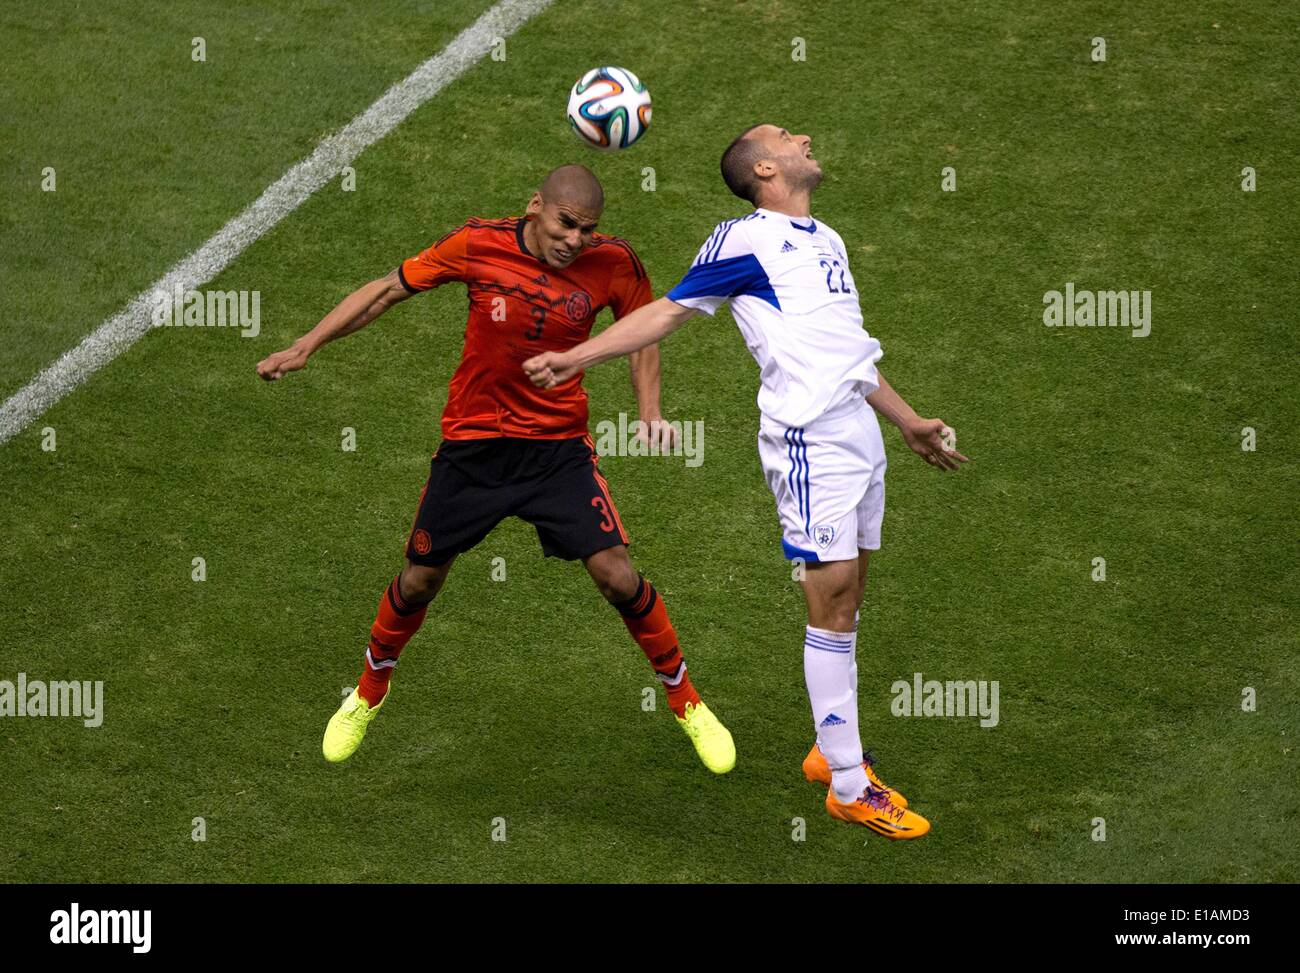 Mexico City, Mexico. 28th May, 2014. Carlos Salcido (L) from Mexico vies for the ball with Omer Damari from Israel during a friendly match at the Azteca Stadium in Mexico City, capital of Mexico, on May 28, 2014. Credit:  David de la Paz/Xinhua/Alamy Live News Stock Photo